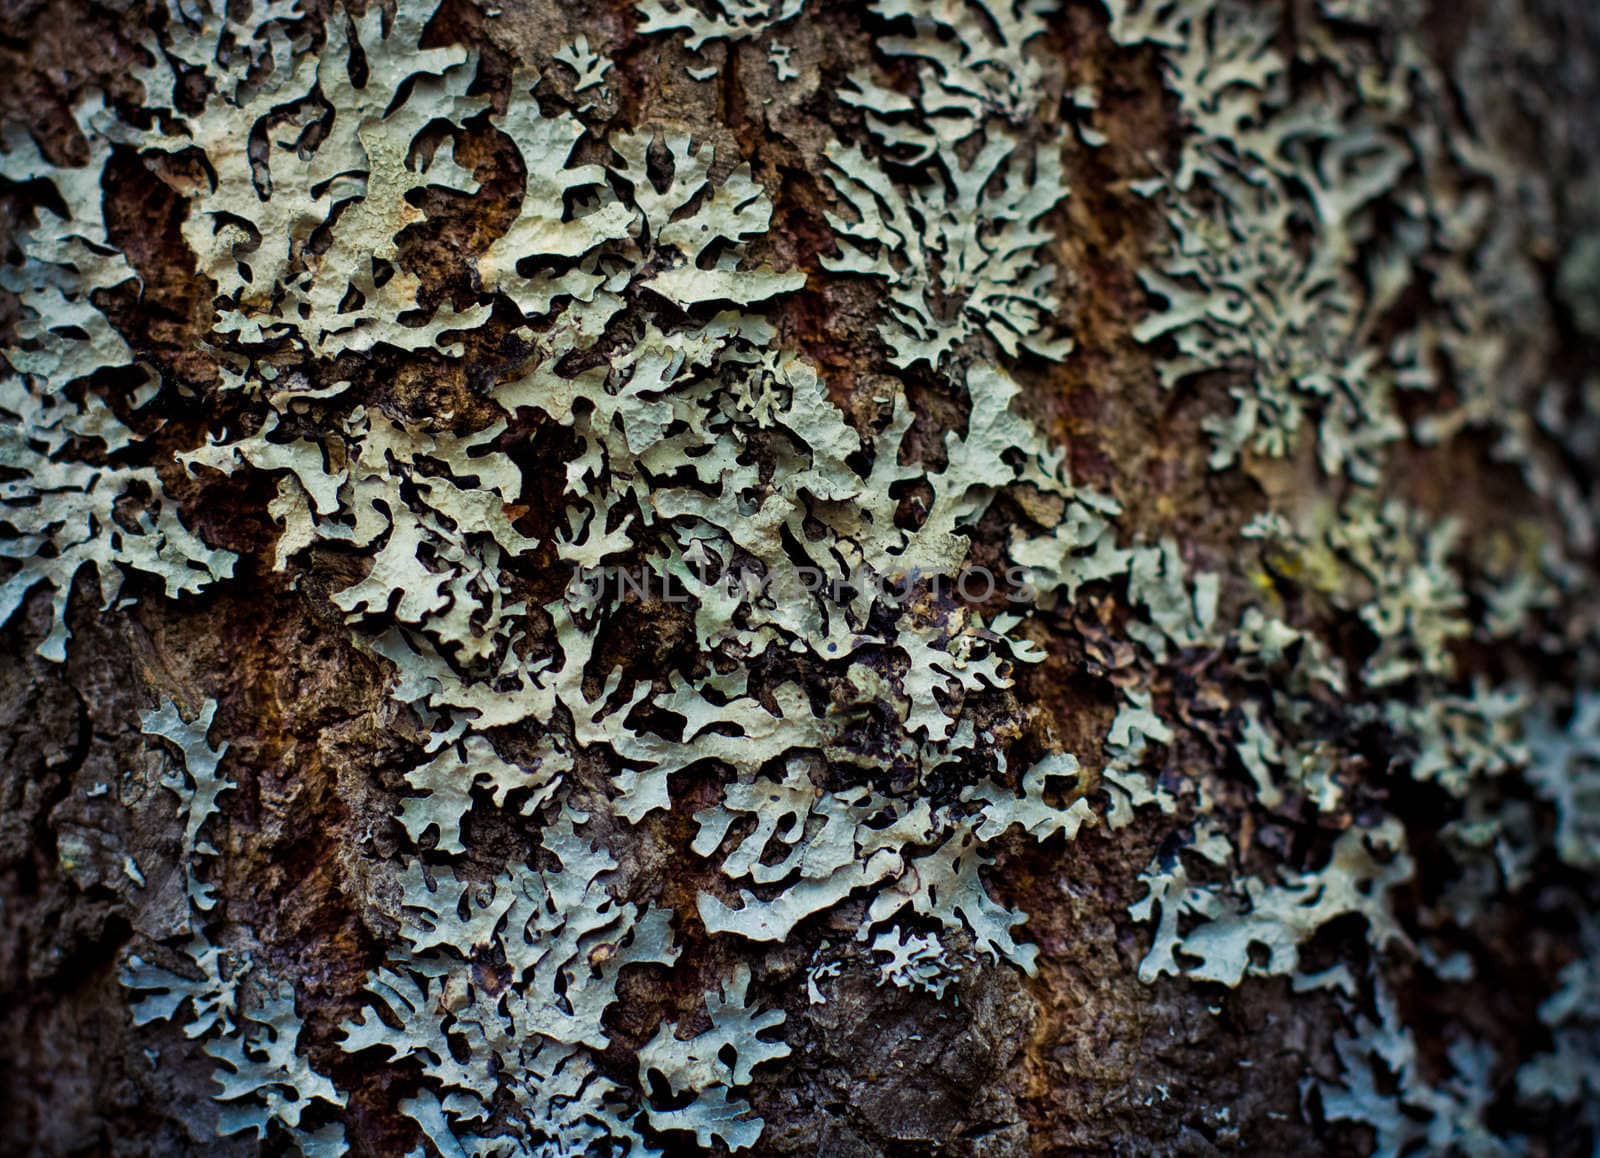 Lichen on wood surface by pashabo